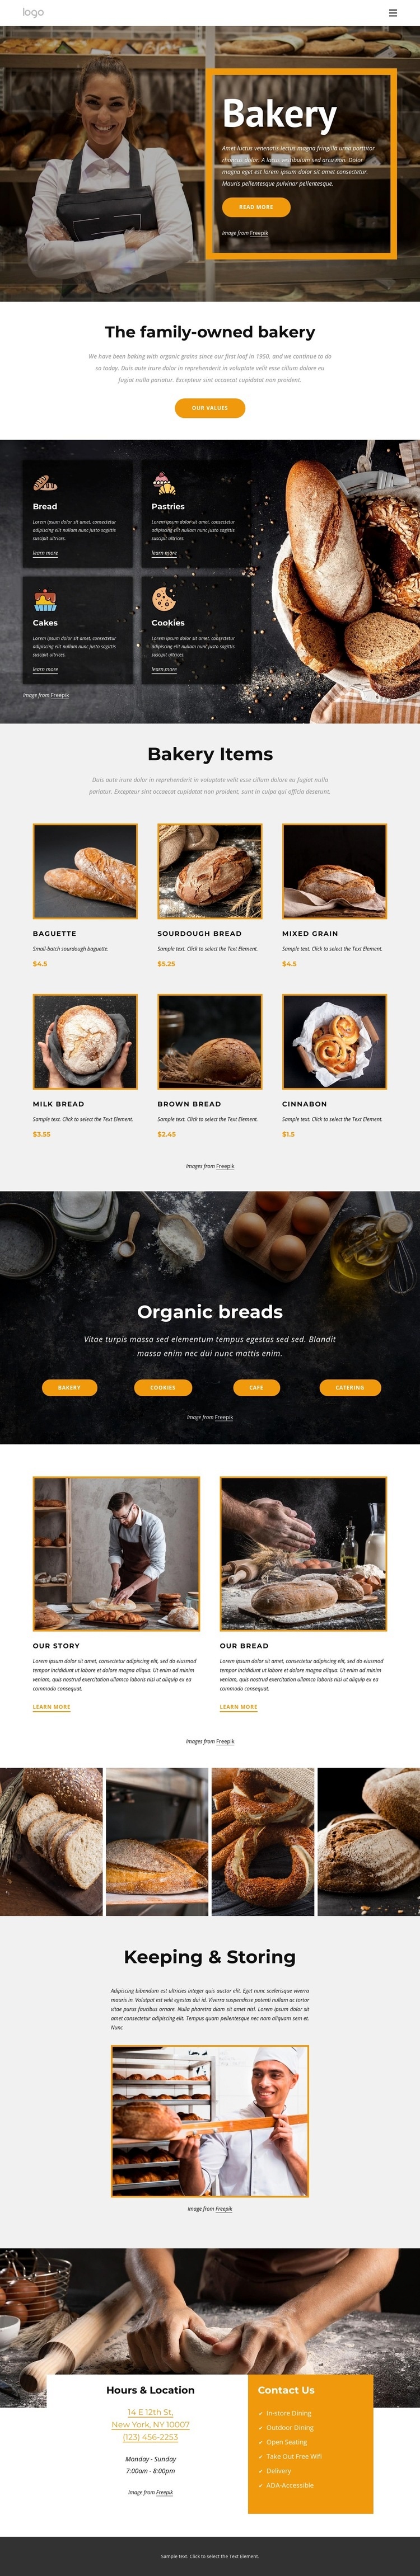 The family-owned bakery Homepage Design